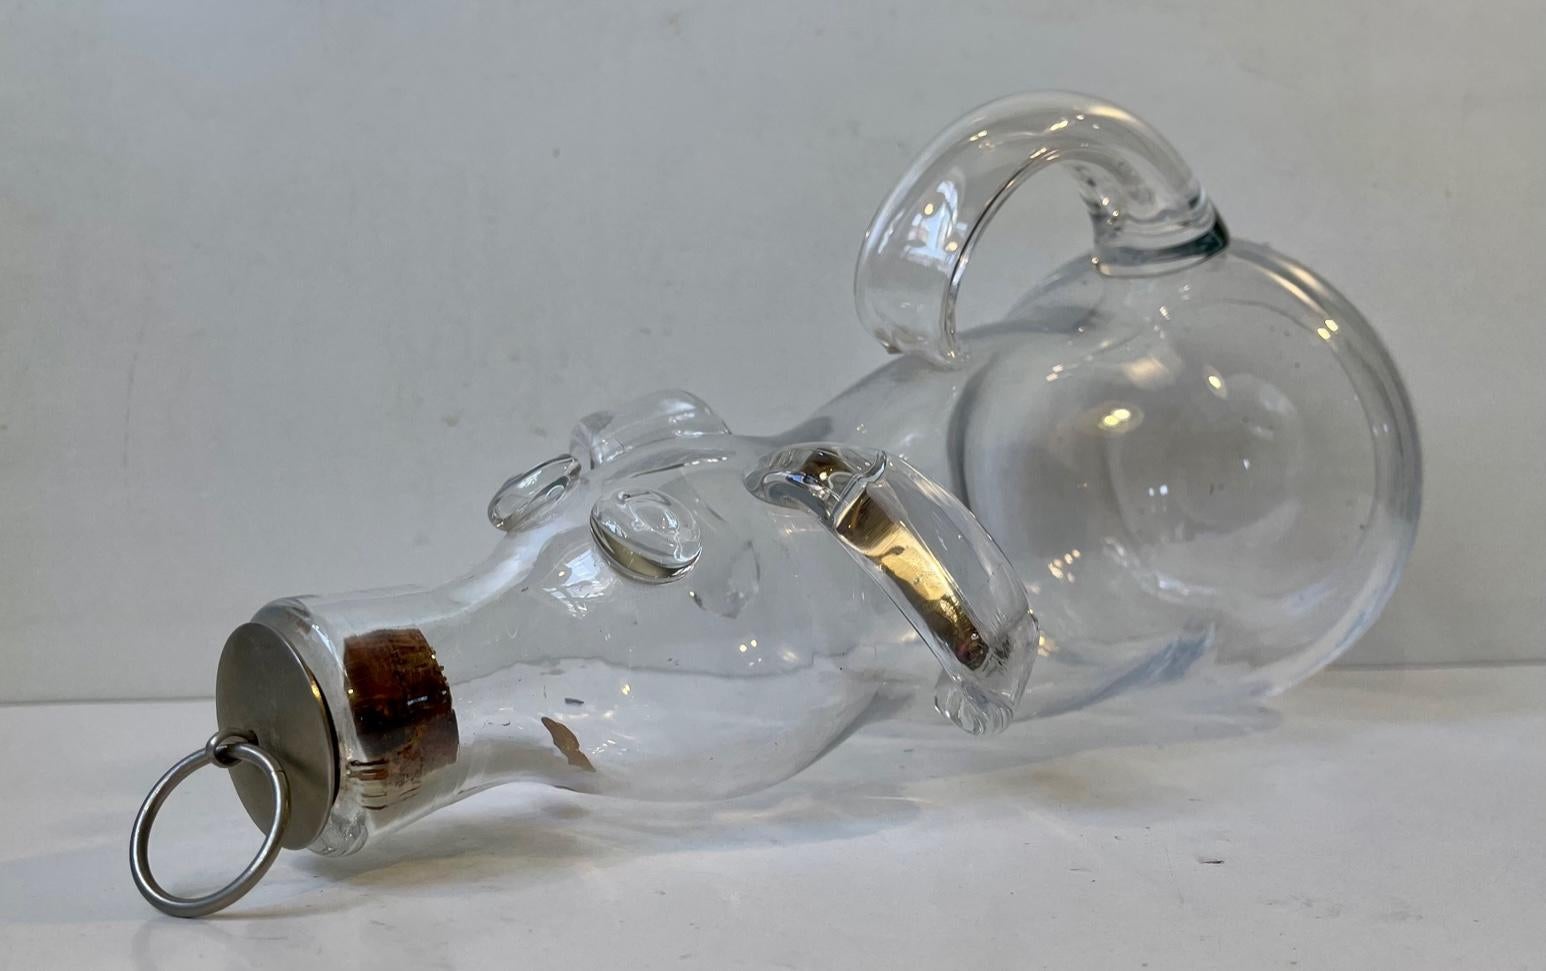 Humorous decanter with handle depicting a dog or pig. Studio-made in Hand-blown clear glass. Designed by Erik Höglund and manufactured by Boda in Sweden circa 1970-75. Label from Boda still present to the side. Measurements: height: 30 cm, diameter: